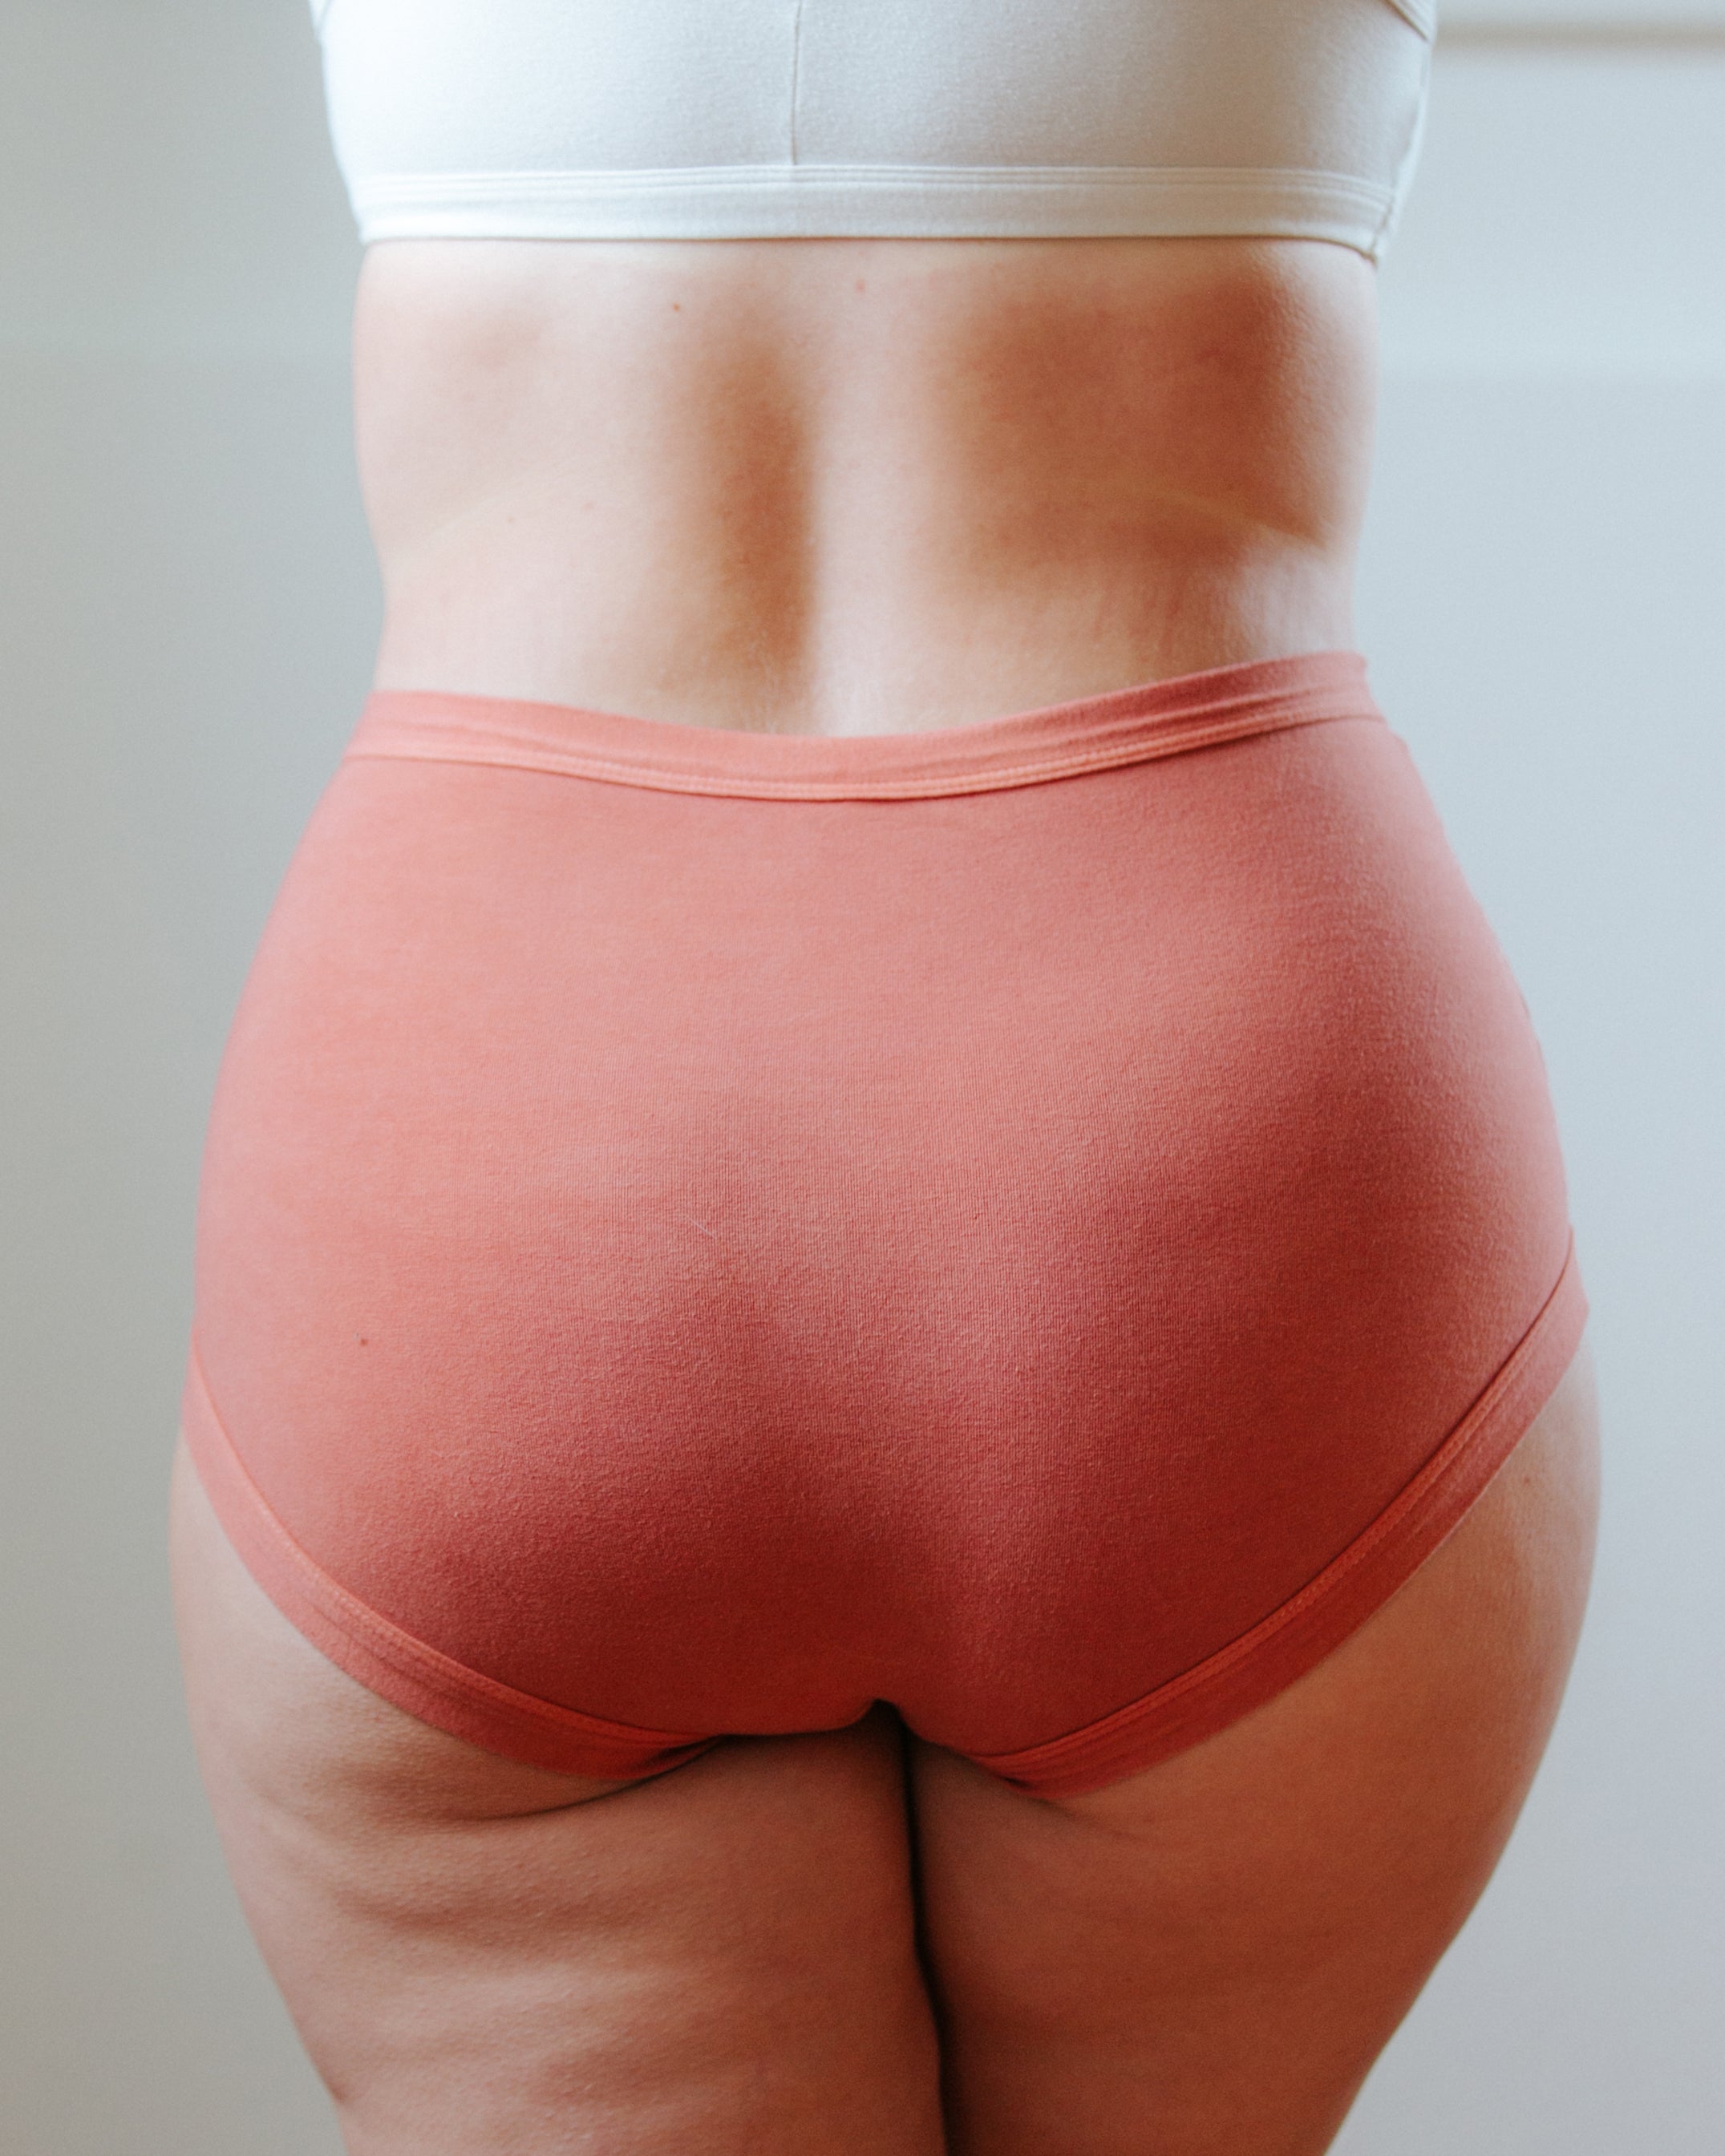 Photo of a bum showing Thunderpants Organic Cotton original style underwear in hand dyed Terracotta color on a model.